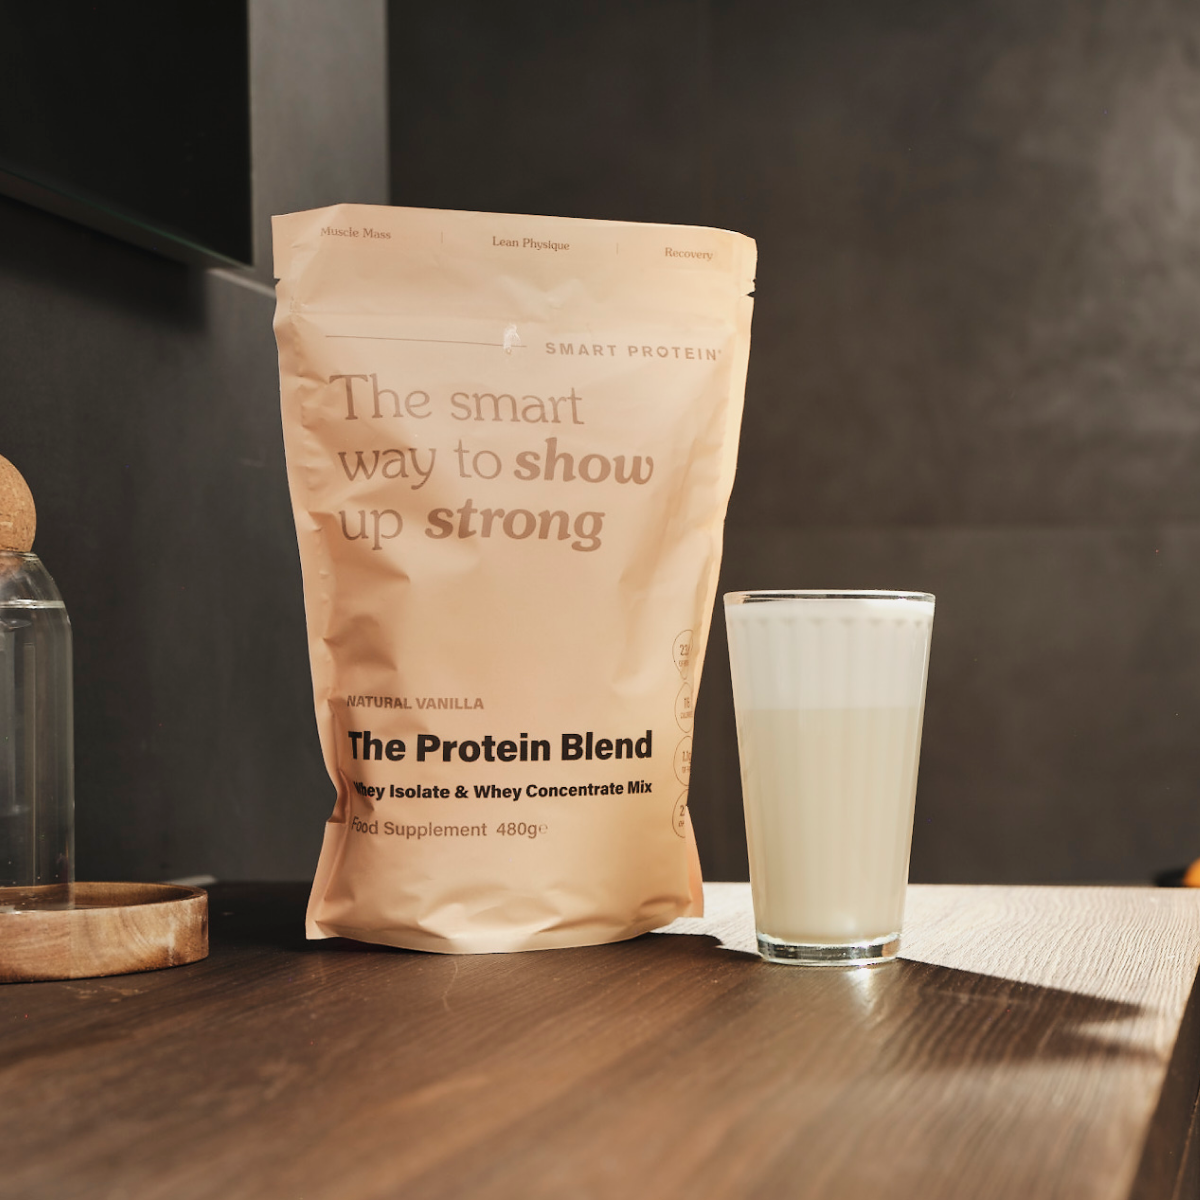 Whey Isolate Protein Blend by Smart Protein on the counter next to a glass